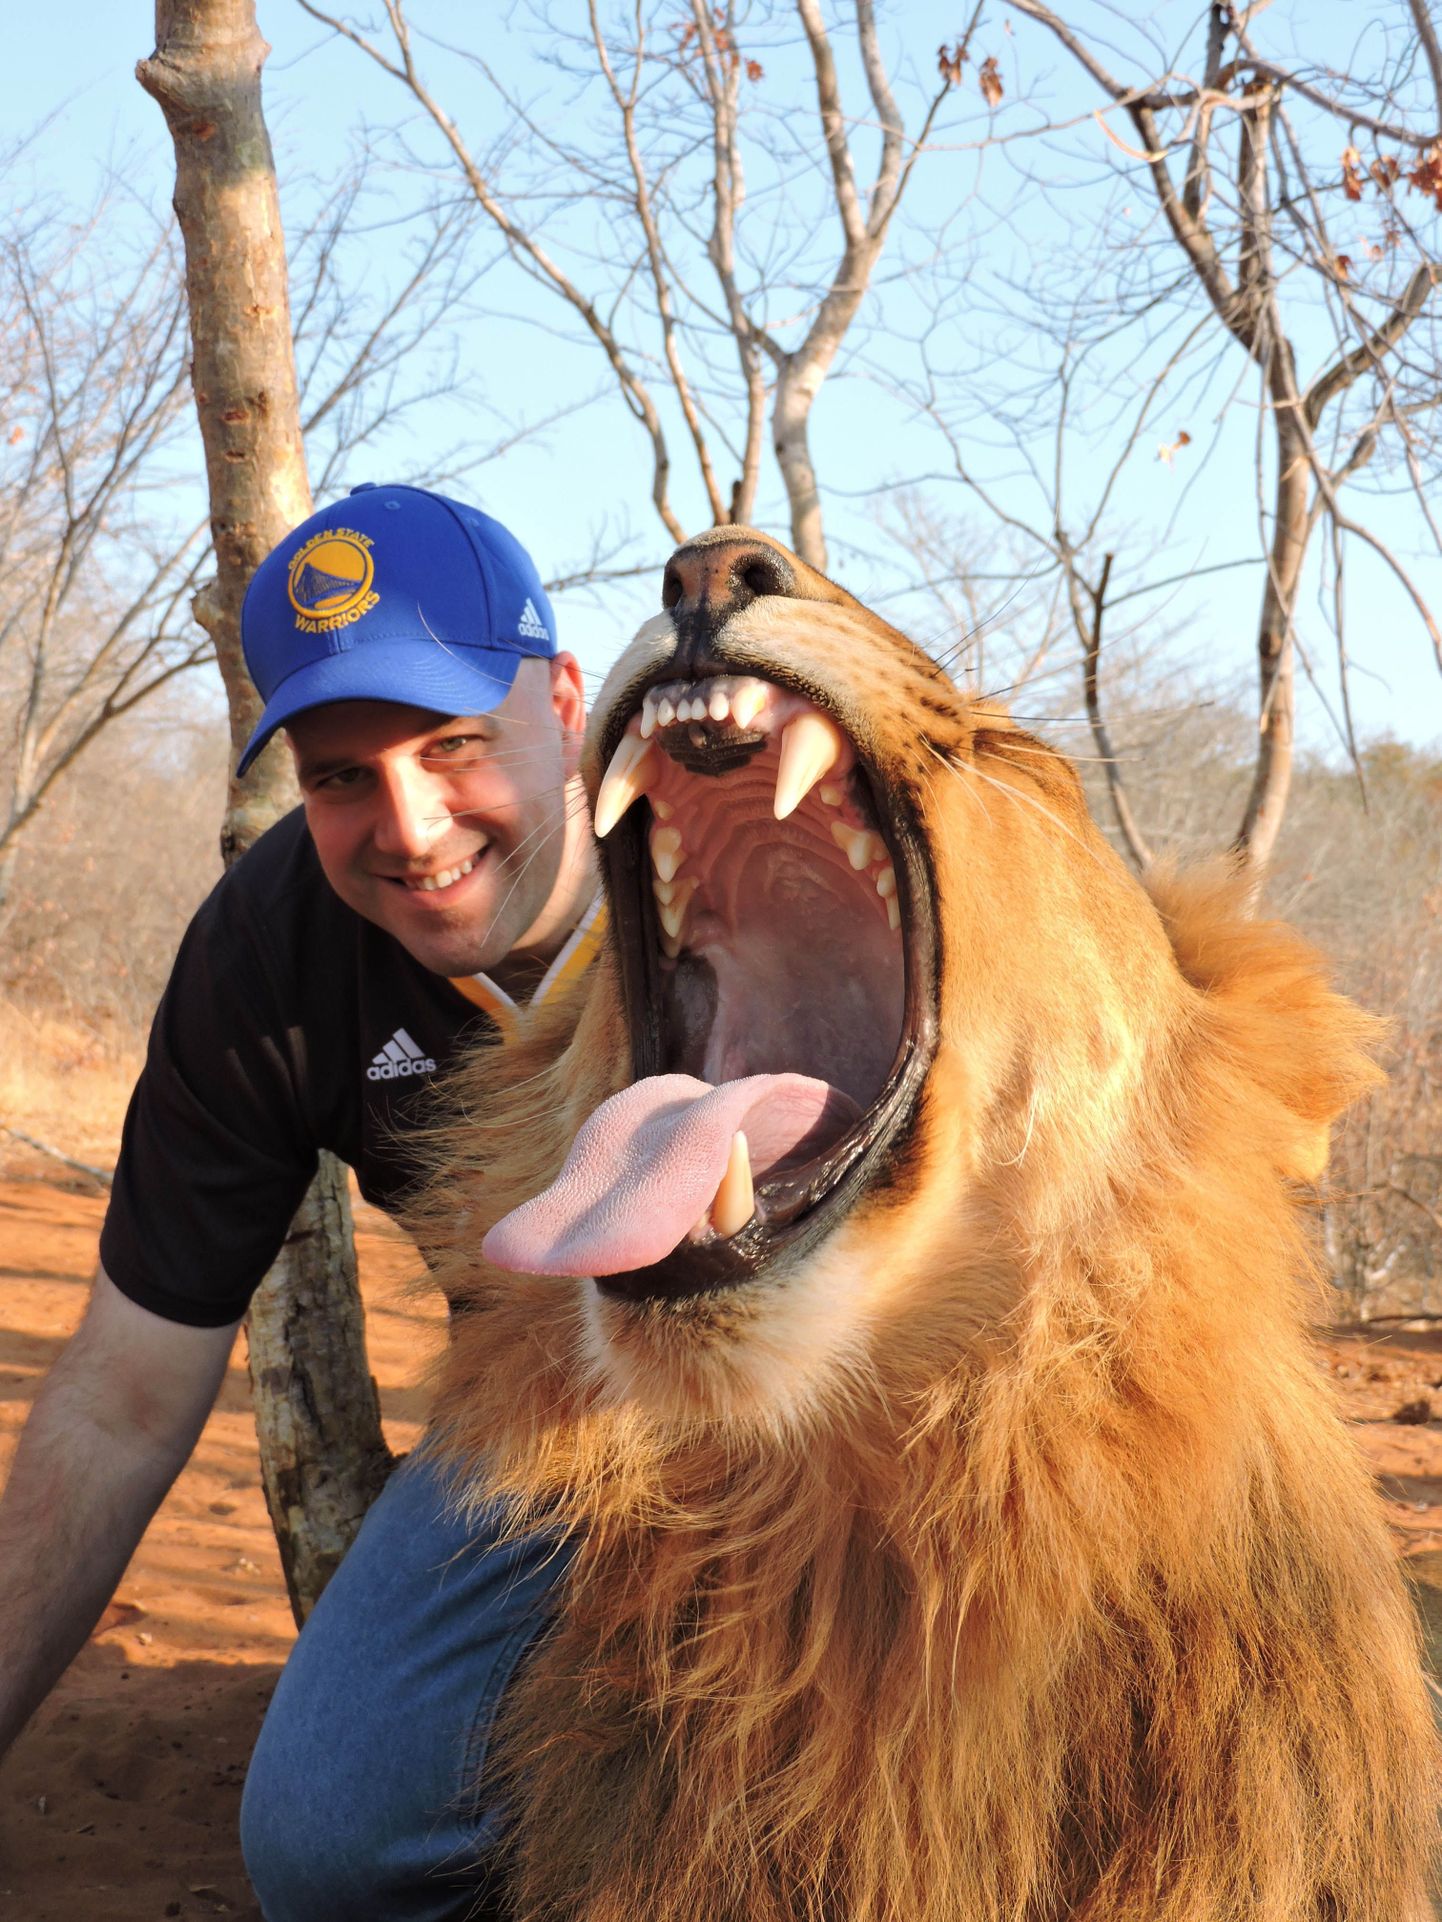 PIC FROM CATERS NEWS - ( PICTURED Ted with Napoleon the lion  ) - This lion gave a man the worlds scariest bear hug. Tourist Ted Papastefan got the chance to have the ultimate up close experience with a lion by posing for a photoshoot with the animal. But the lion decided to make it slightly more intimate. The predator appears to be enjoying a belly rub in the sunshine when Ted, from Illinois, moves his hand away. SEE CATERS COPY